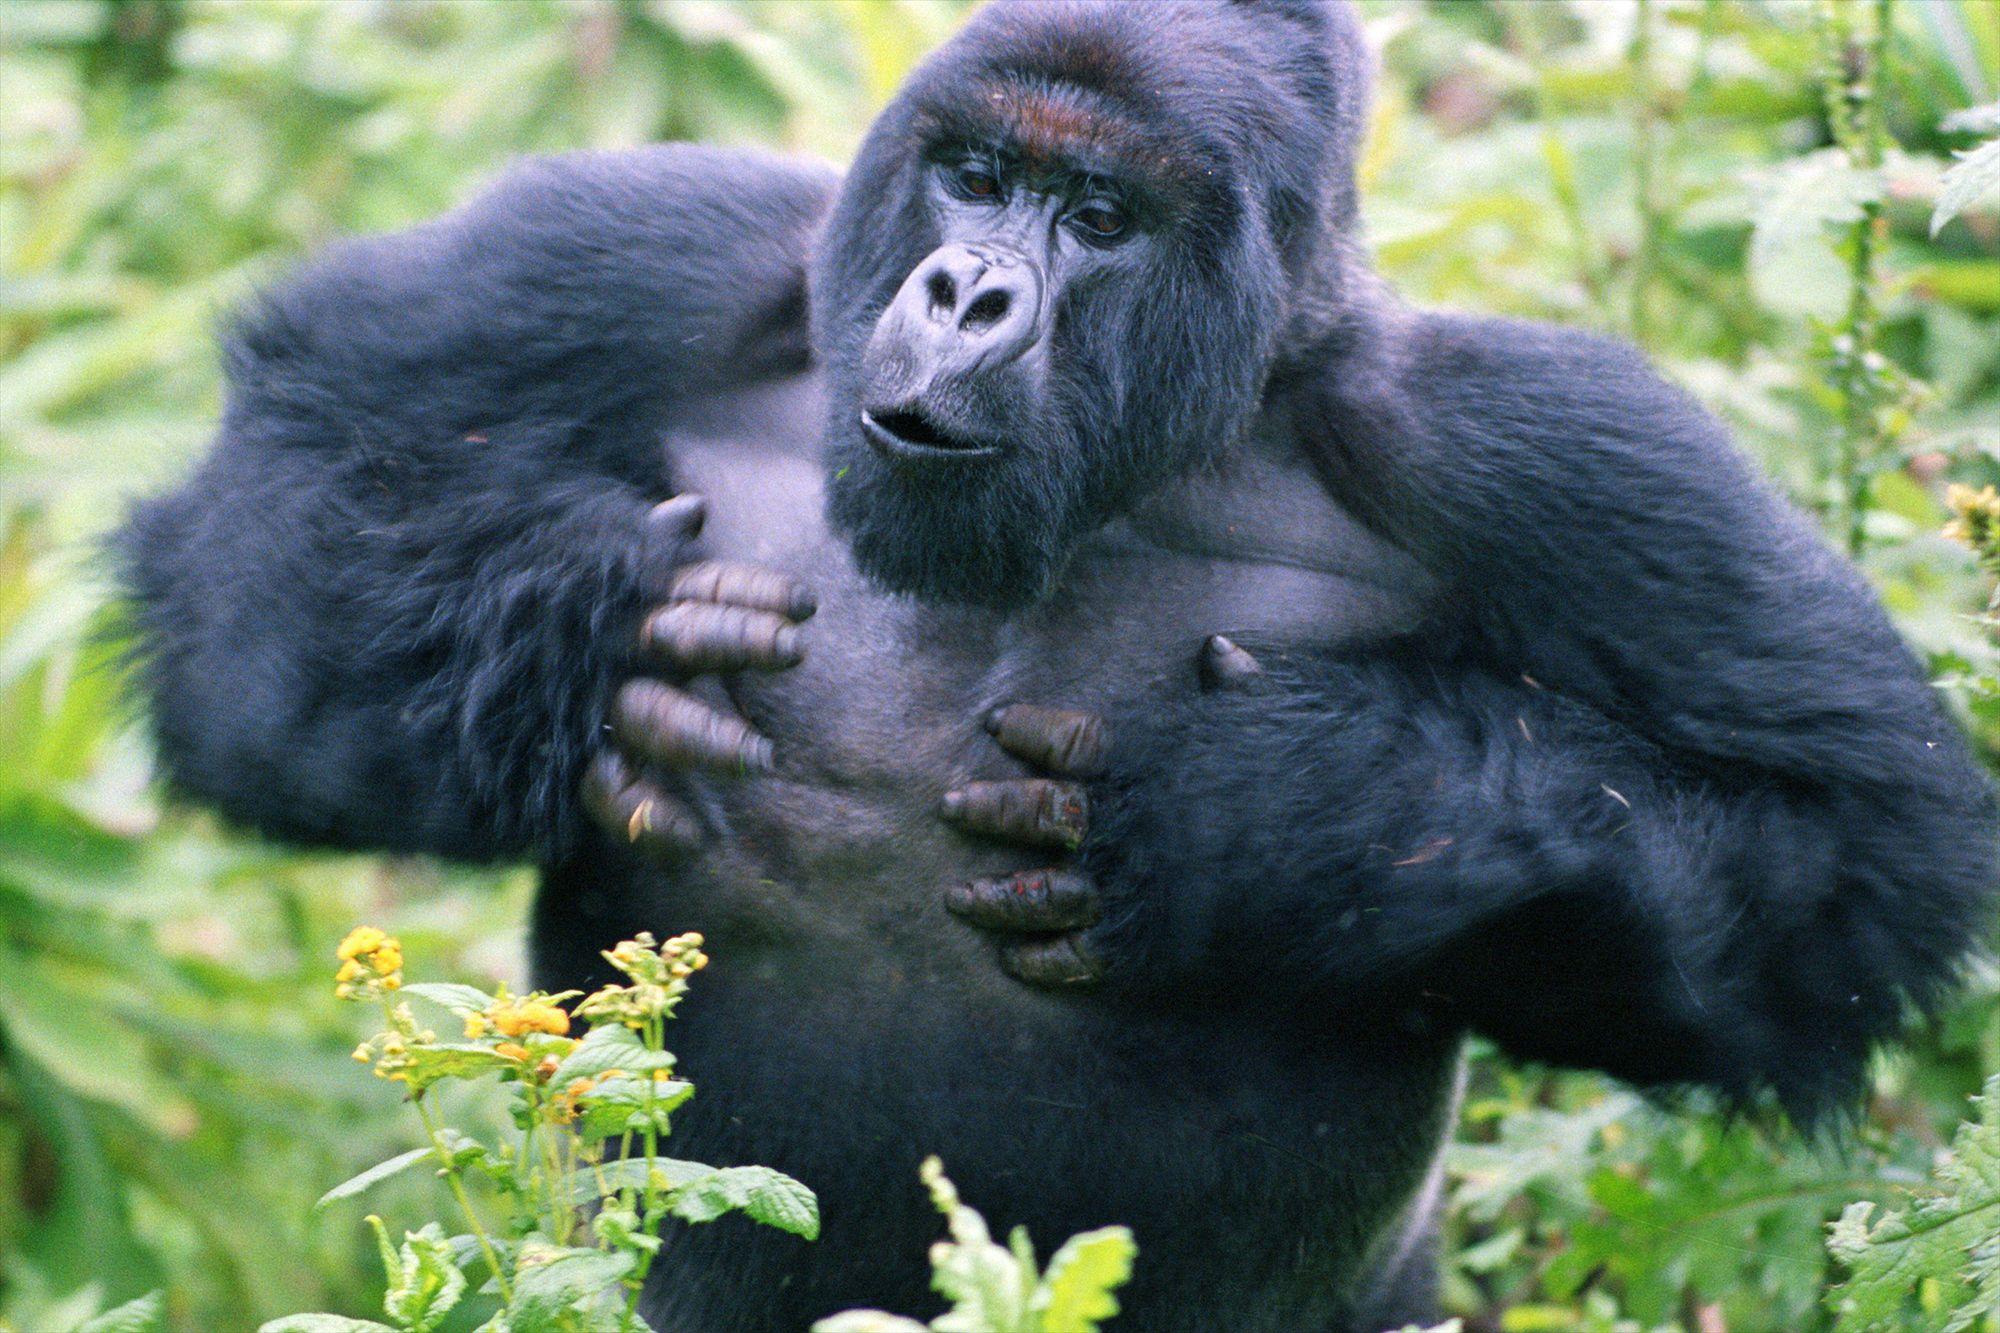 Why do gorillas beat their chests? 